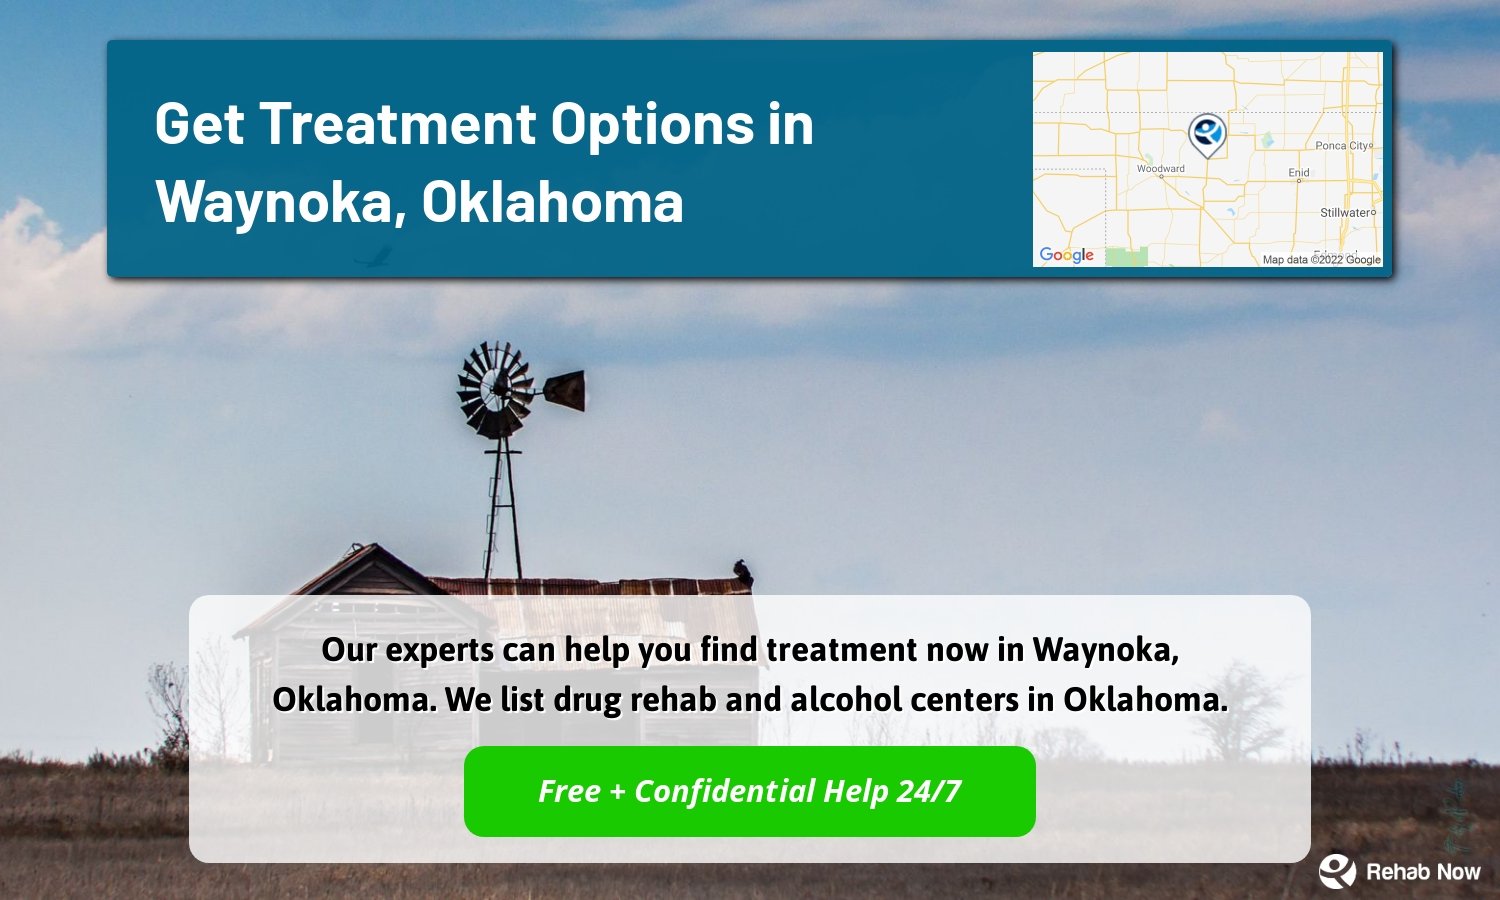 Our experts can help you find treatment now in Waynoka, Oklahoma. We list drug rehab and alcohol centers in Oklahoma.